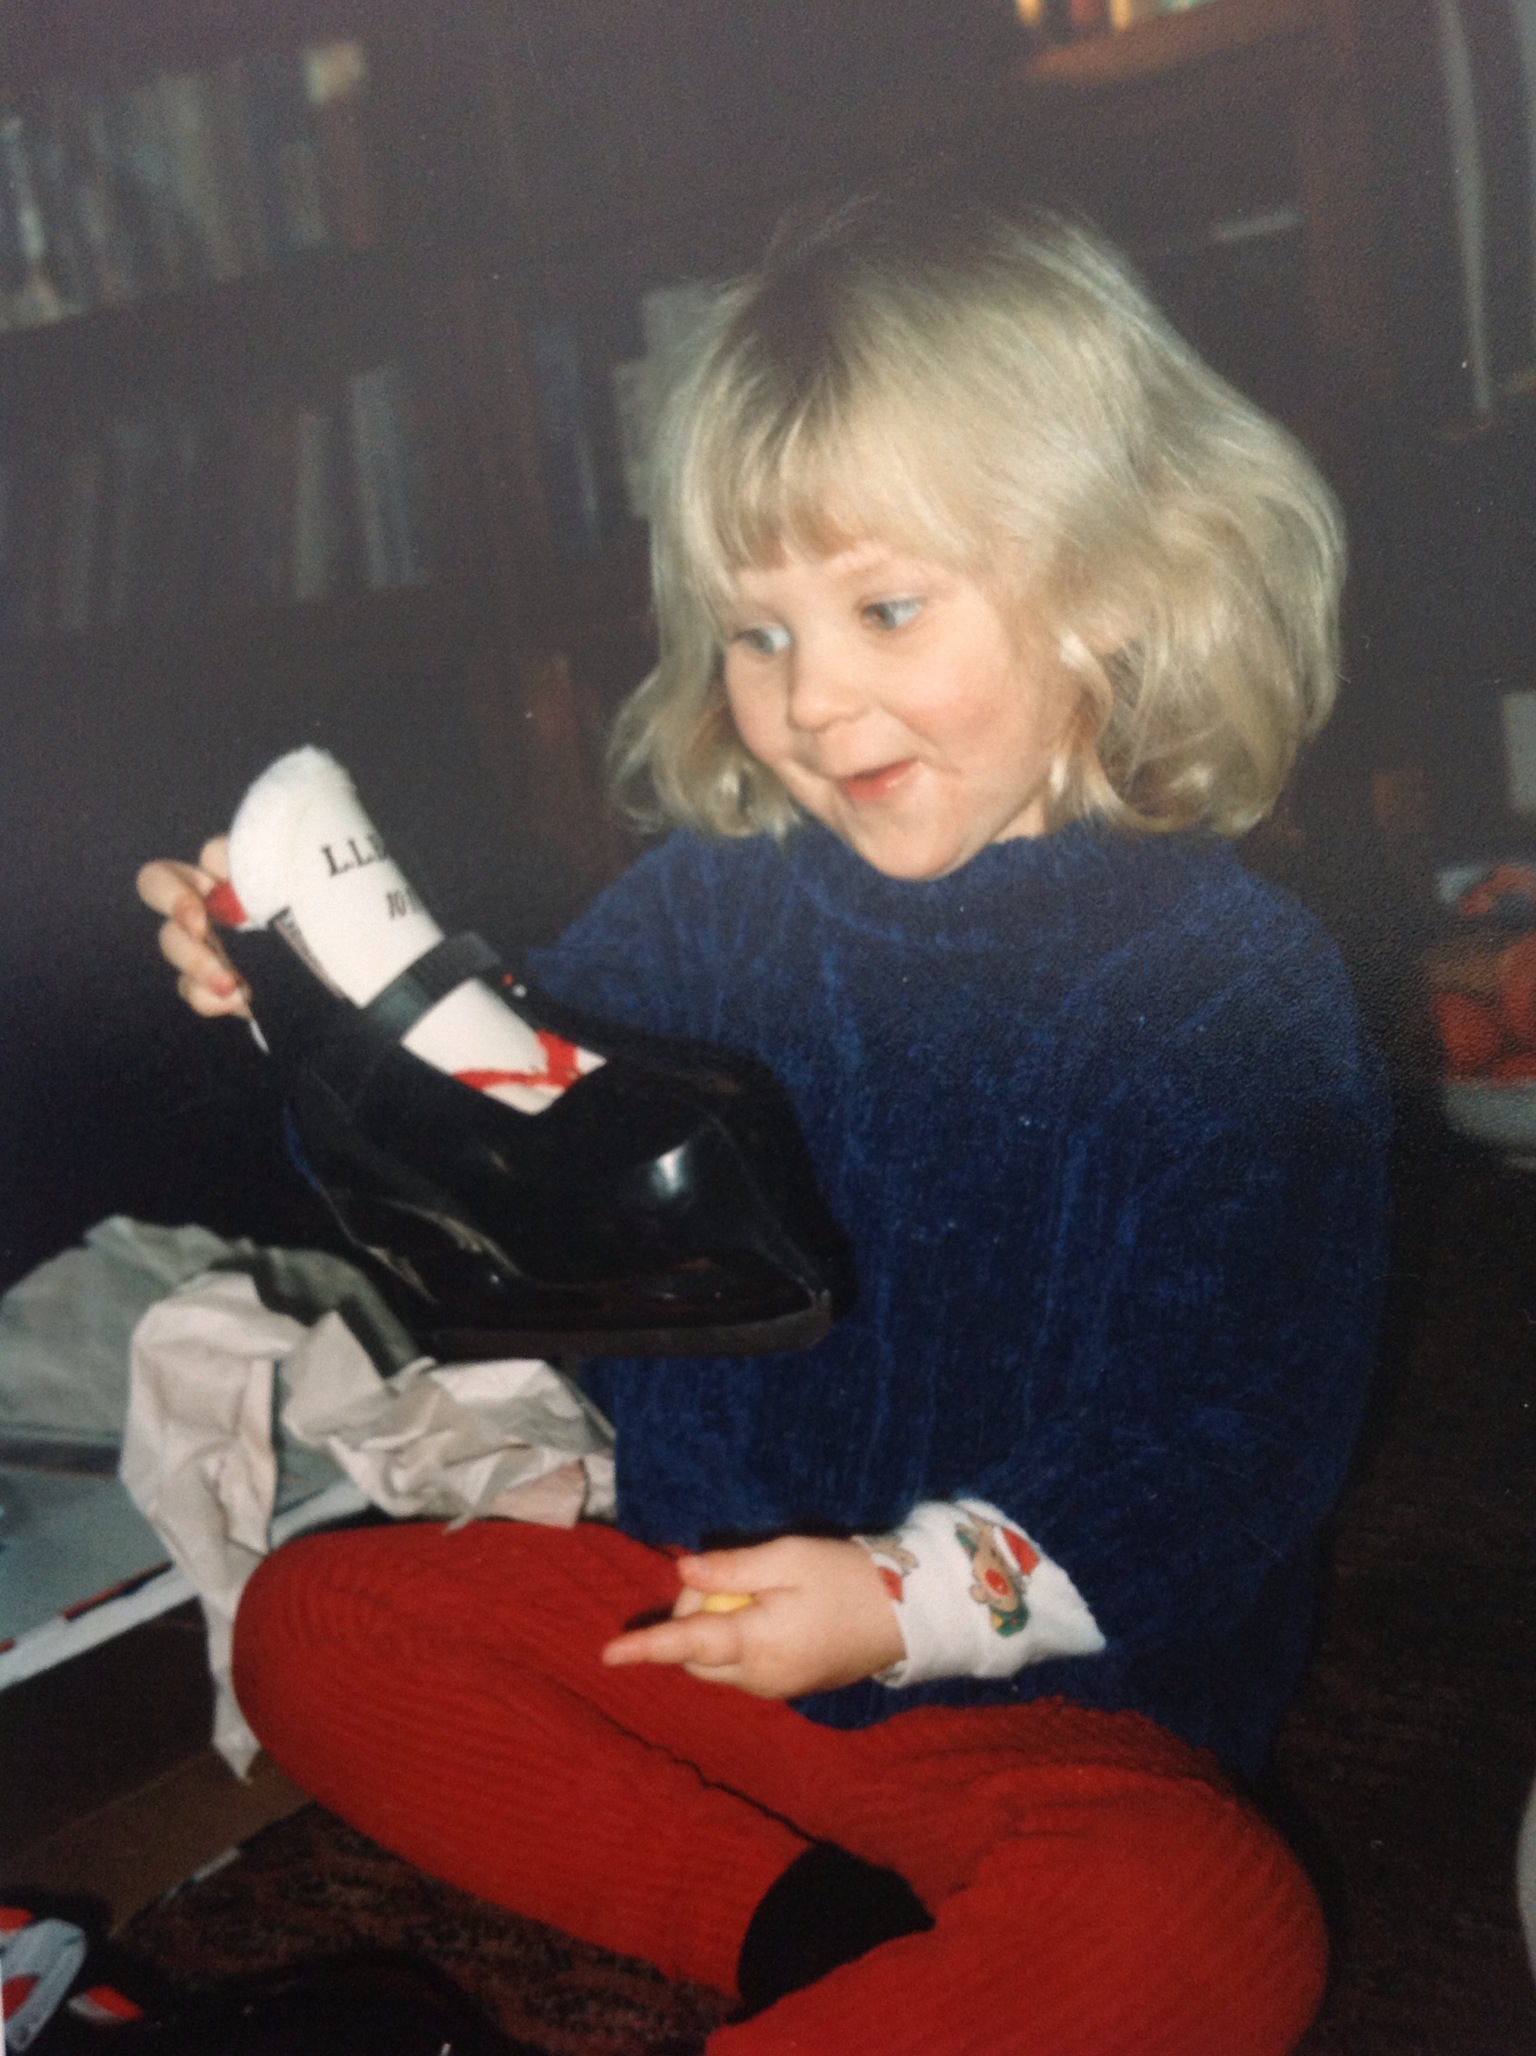 And, finally, where this whole show began: Ellie with her first pair of skates on Christmas morning in Surry, New Hamphire